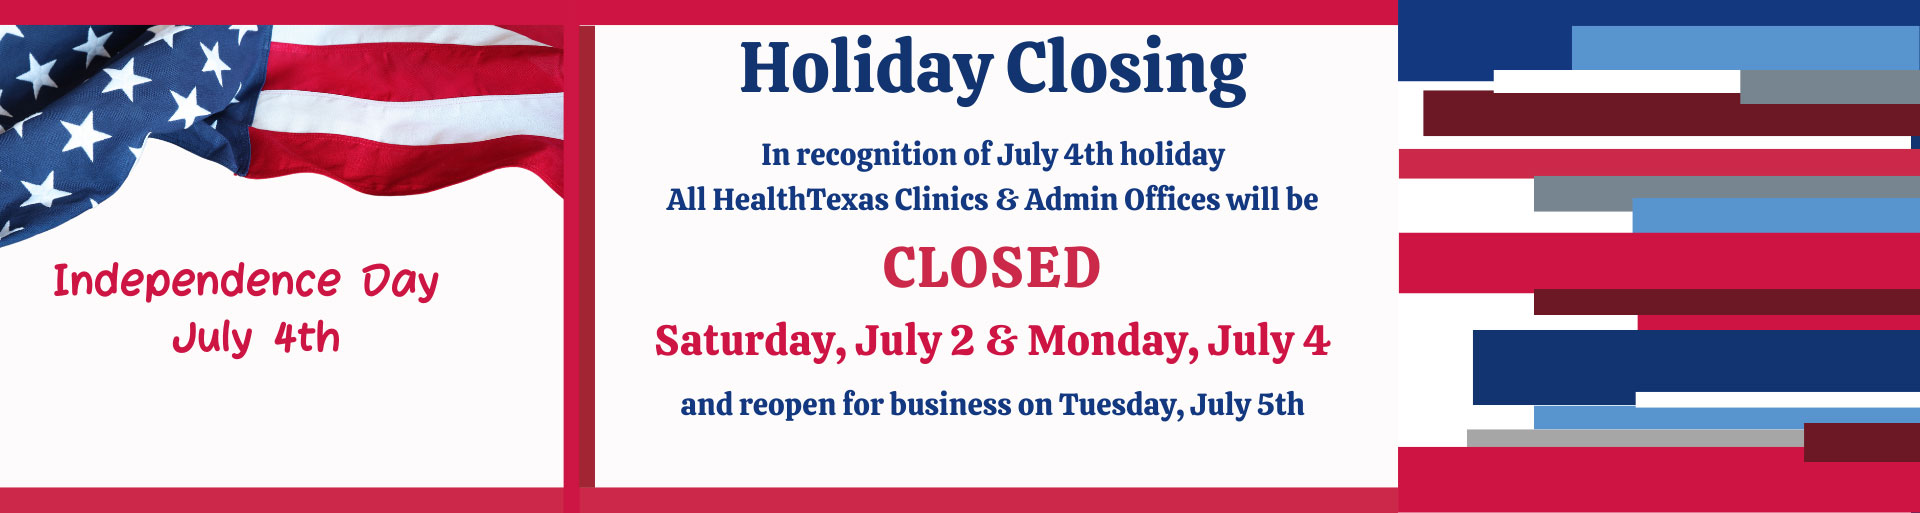 Independence-Day-closing